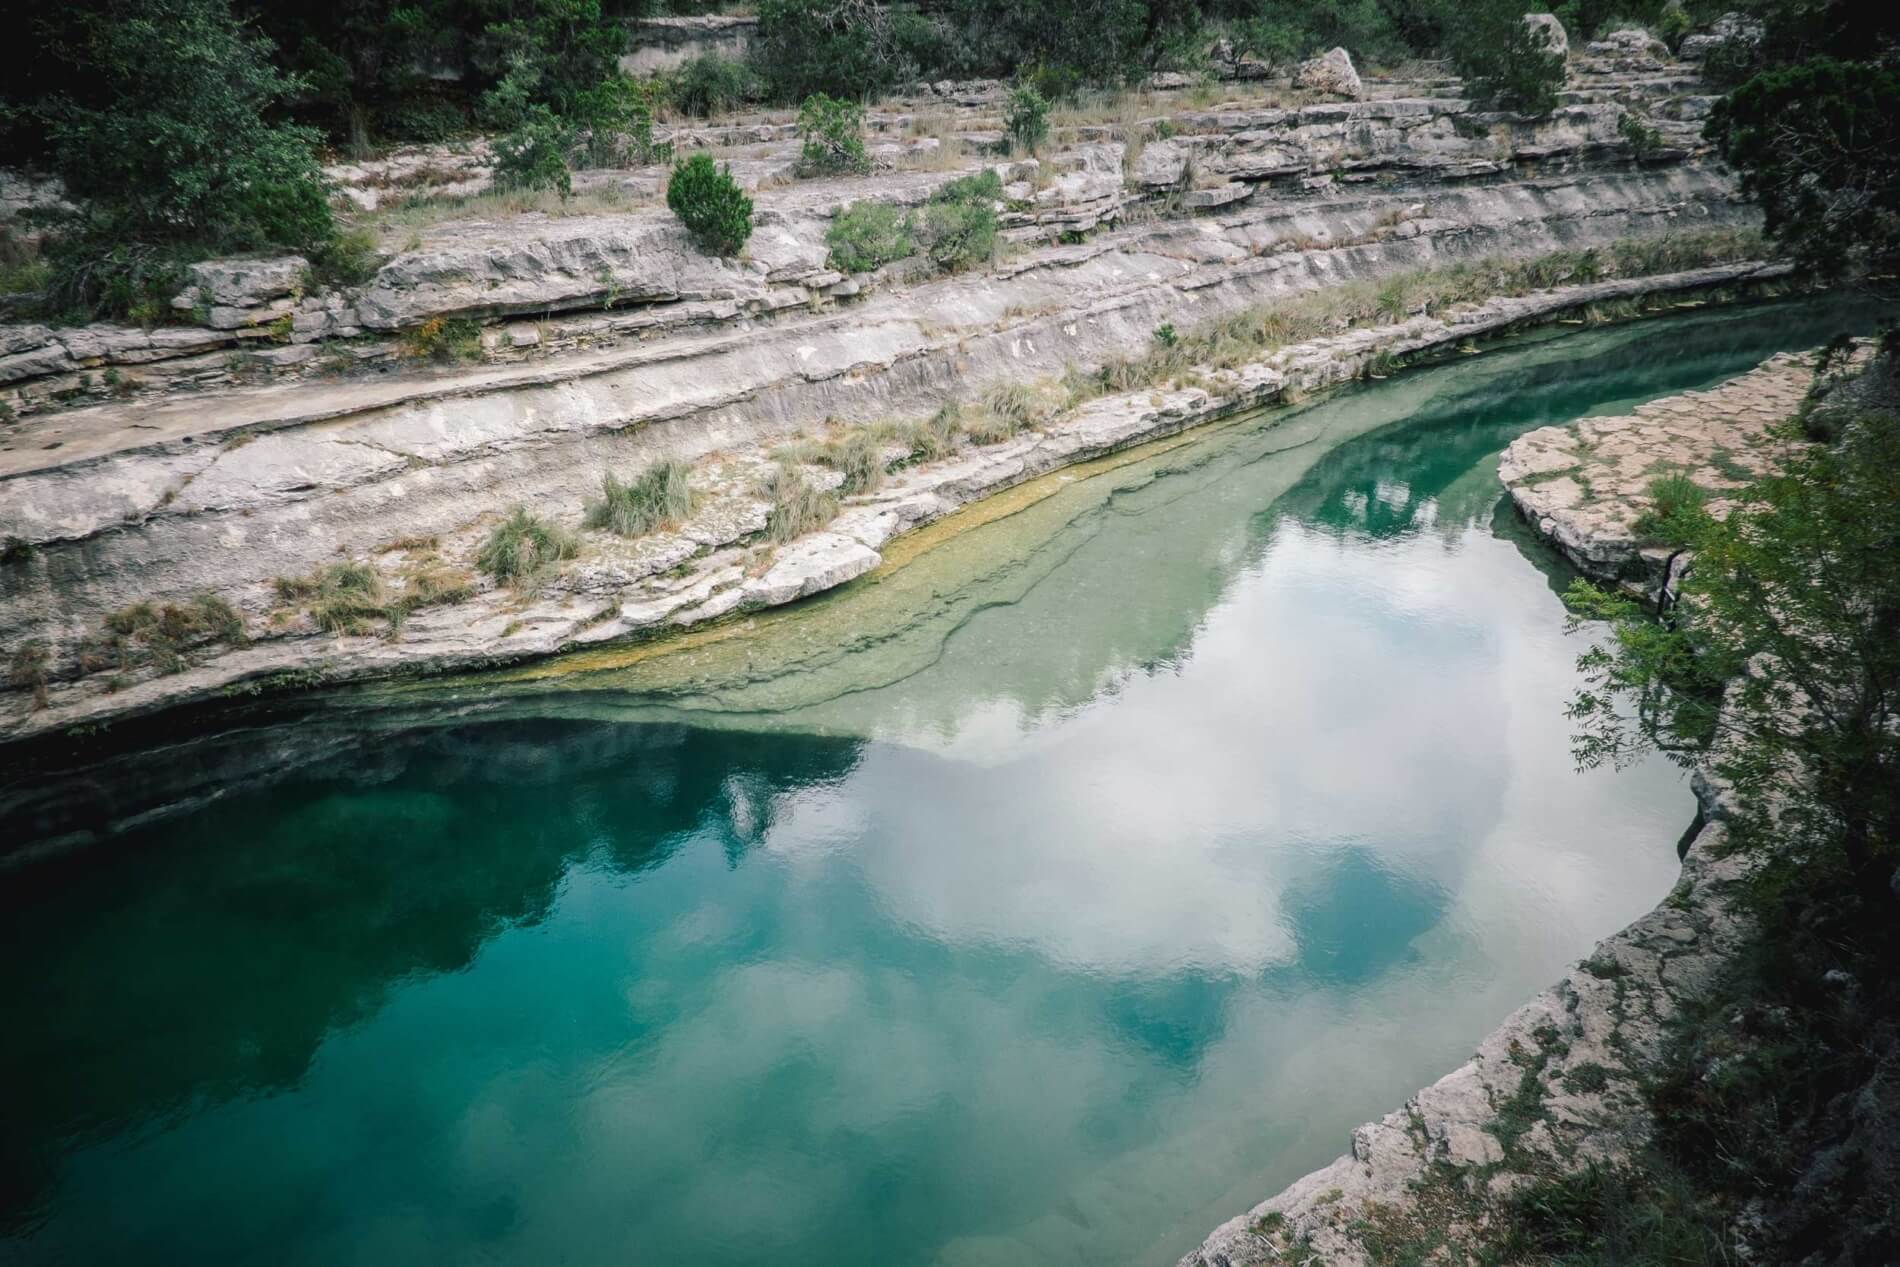 The headwaters of the Frio River - Blue Hole